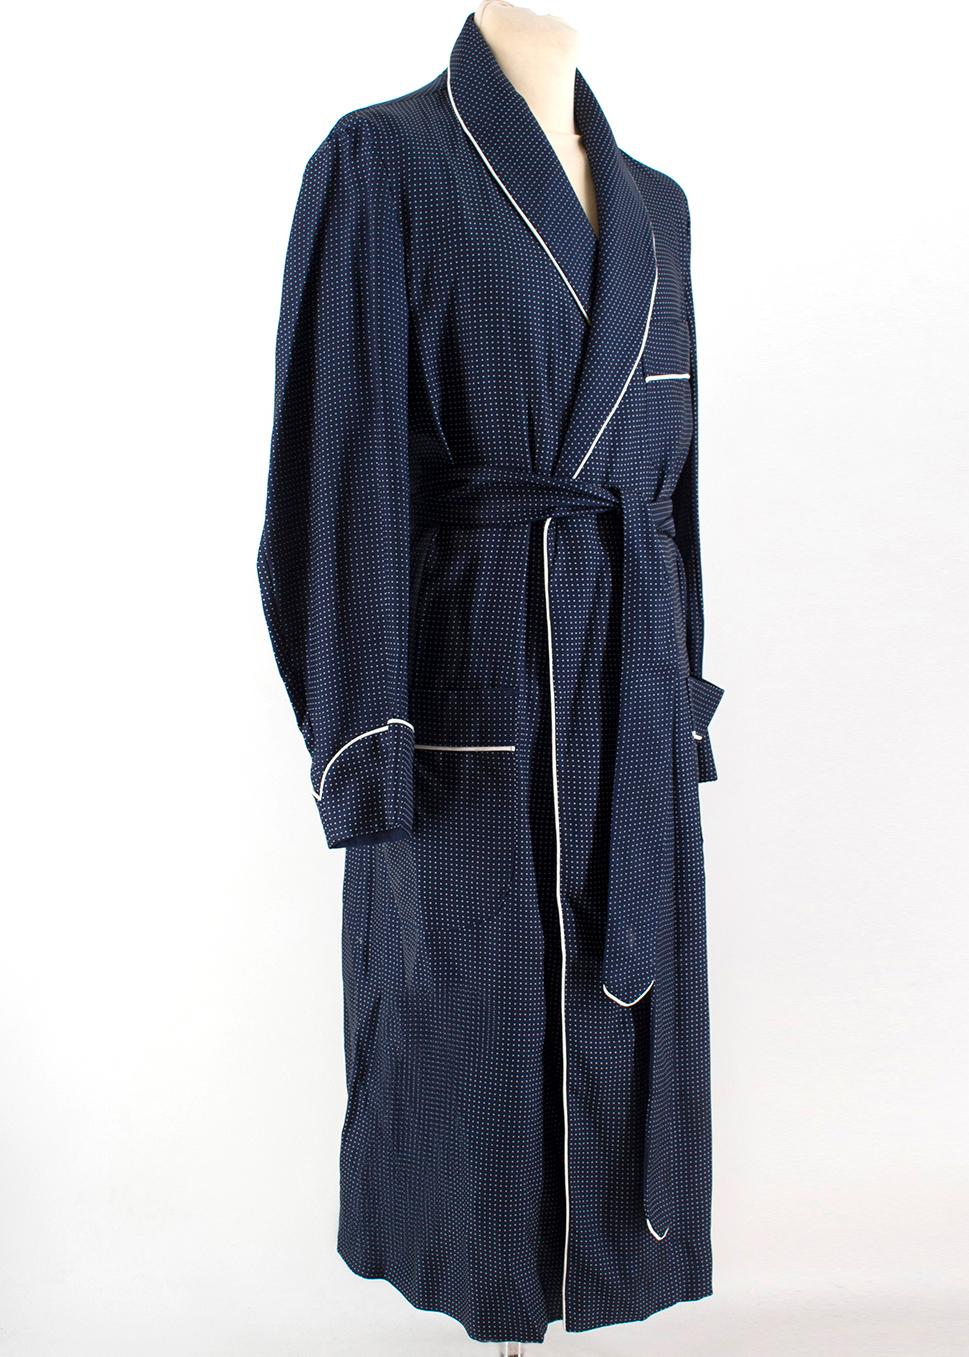 Budd Navy Polka Dot Silk Twill Robe

- Navy silk twill robe
- Lightweight
- Polka dot print
- V-neck
- Long sleeved 
- Chest patch pocket
- Front patch pockets
- Belt loops, waist strap 
- 100% silk

Please note, these items are pre-owned and may